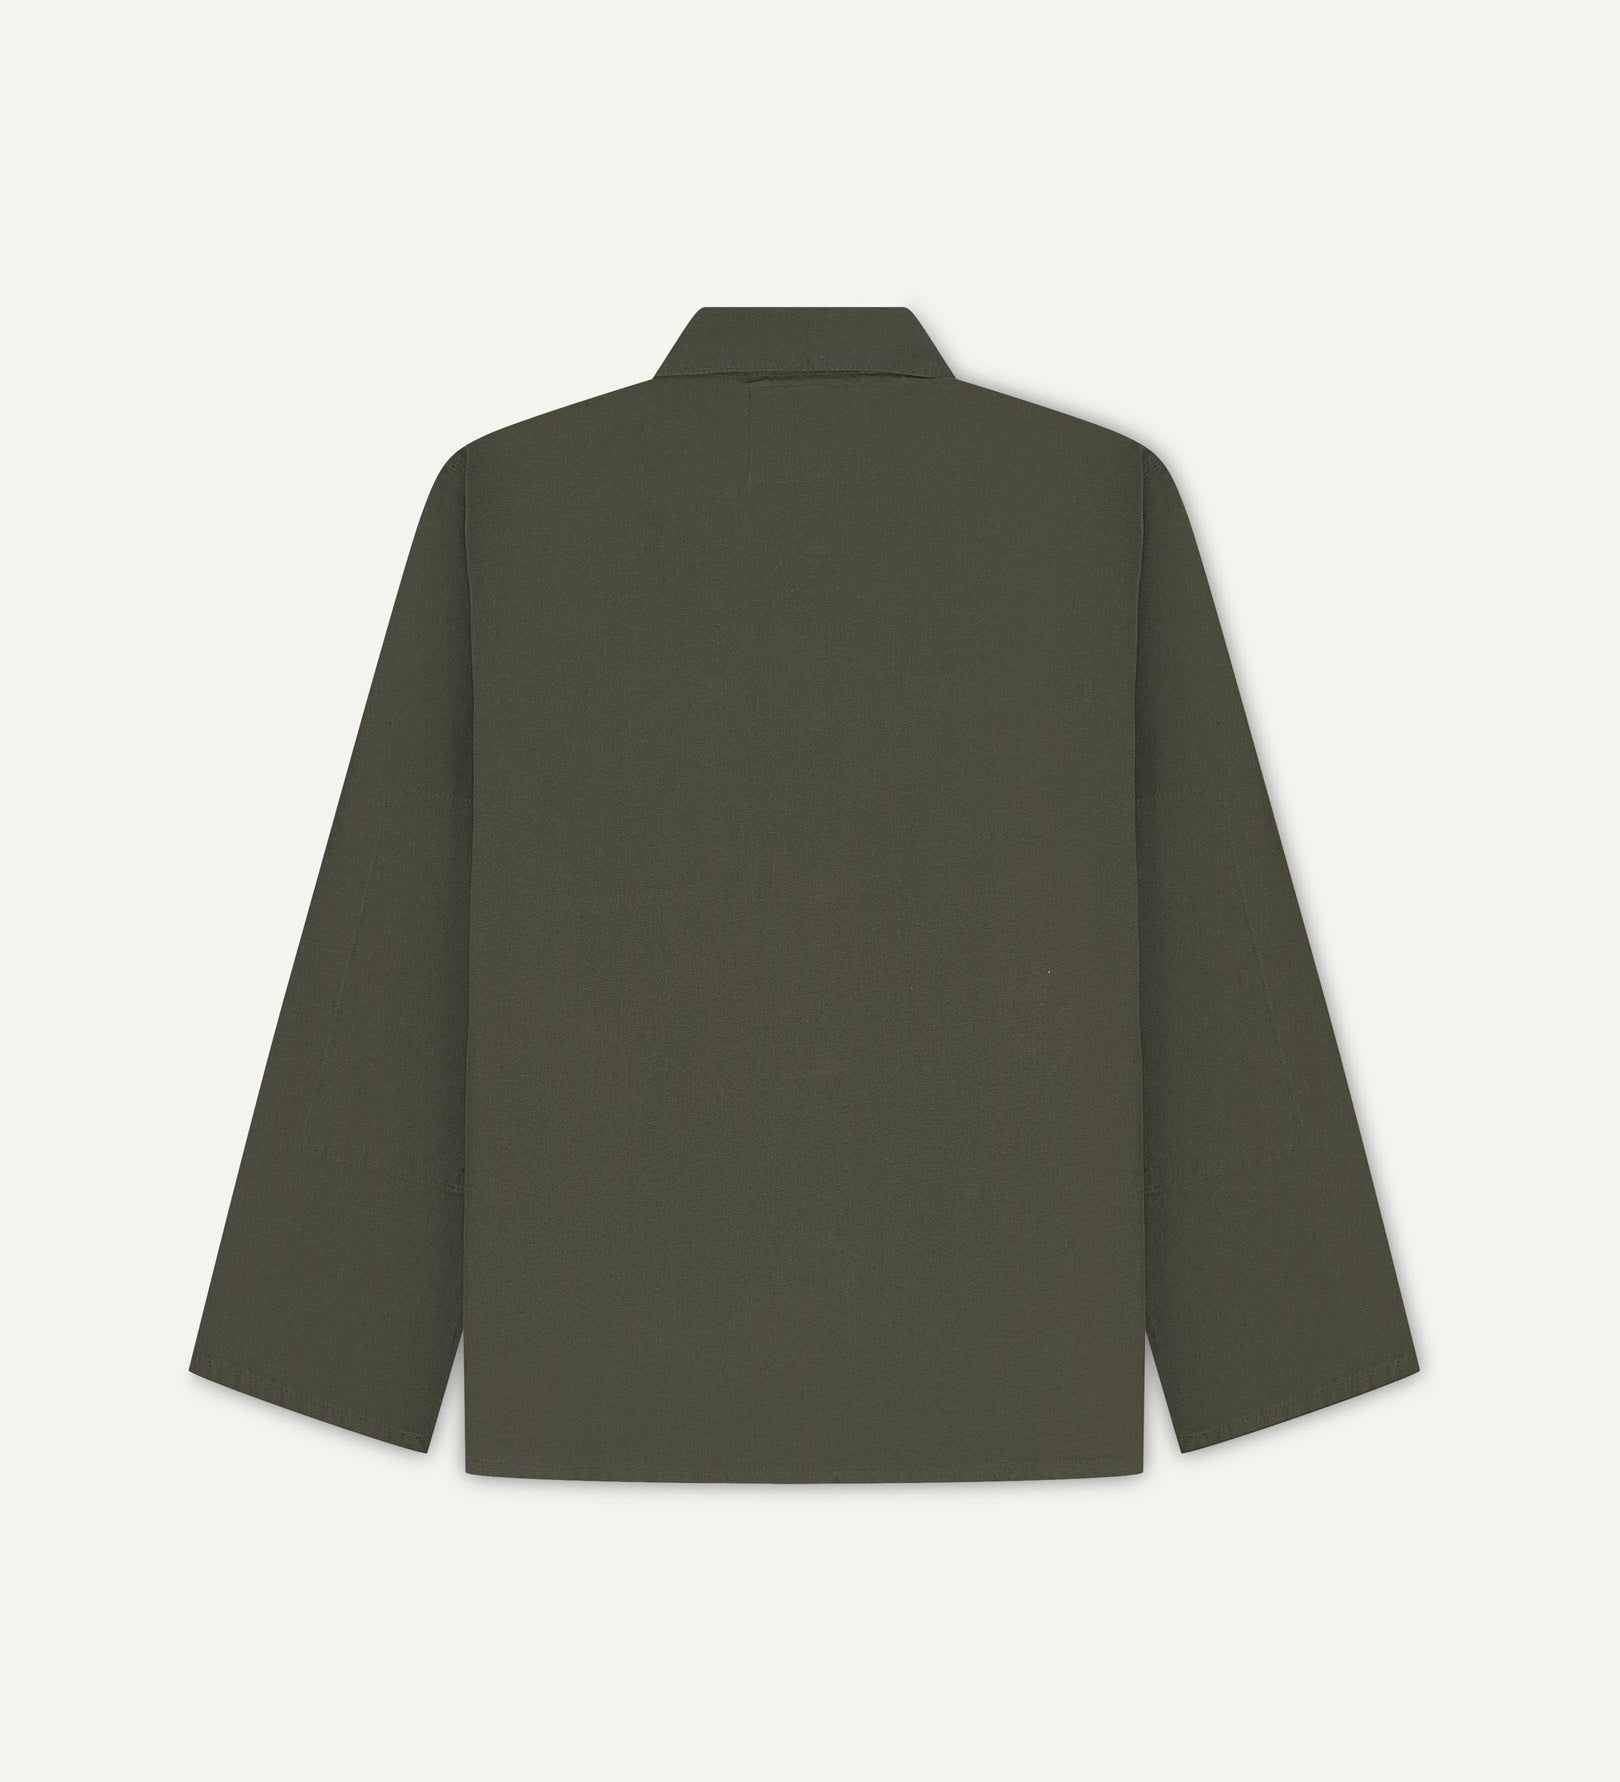 Back view of vine green, buttoned organic cotton overshirt with view of reinforced elbow area and boxy silhouette.